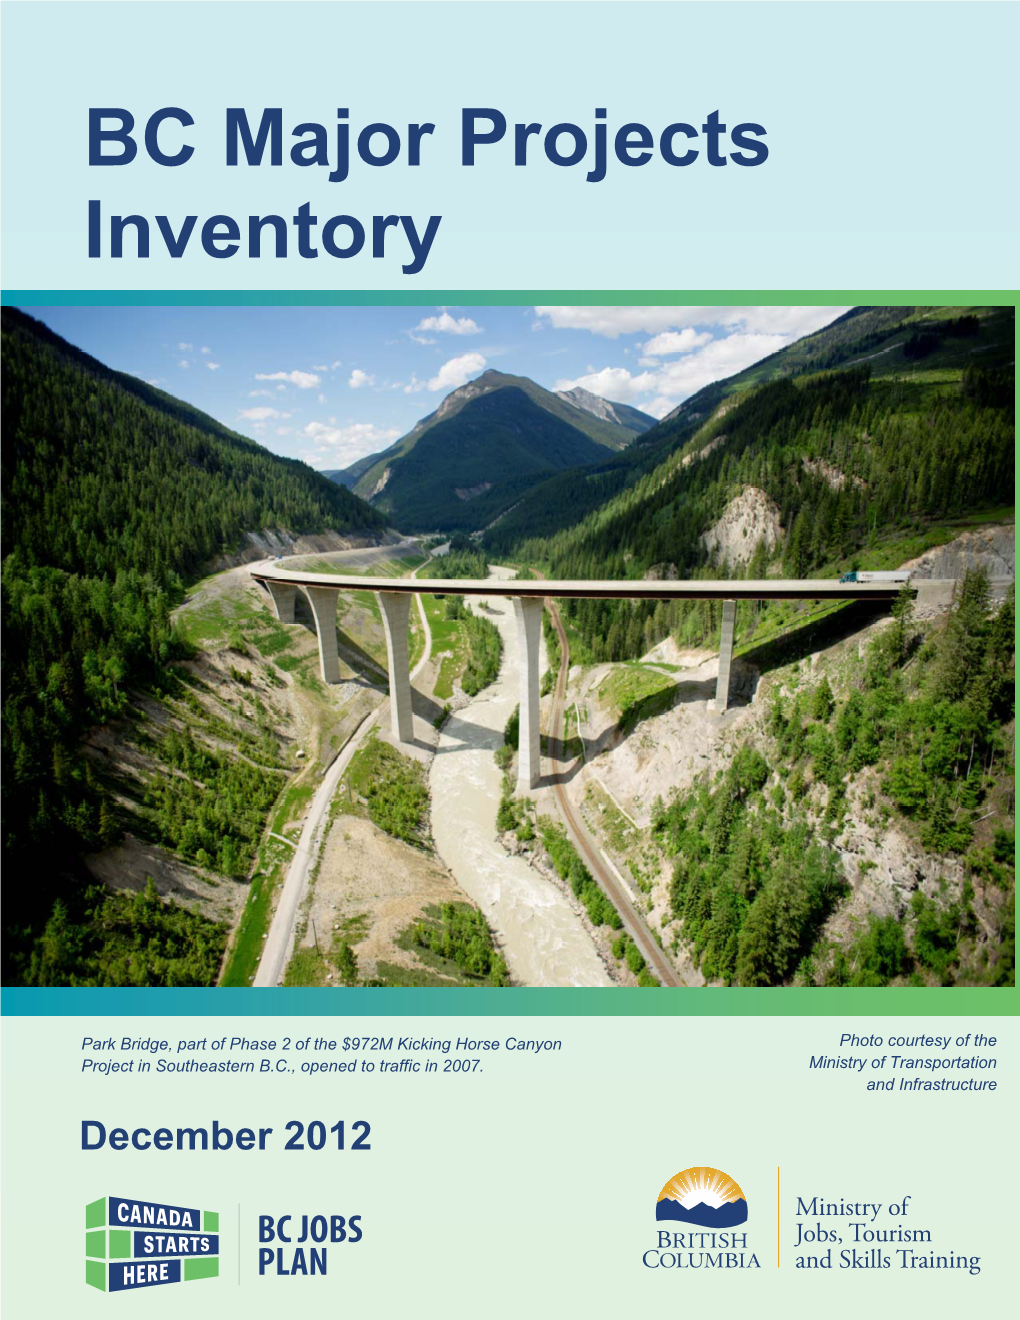 Major Projects Inventory